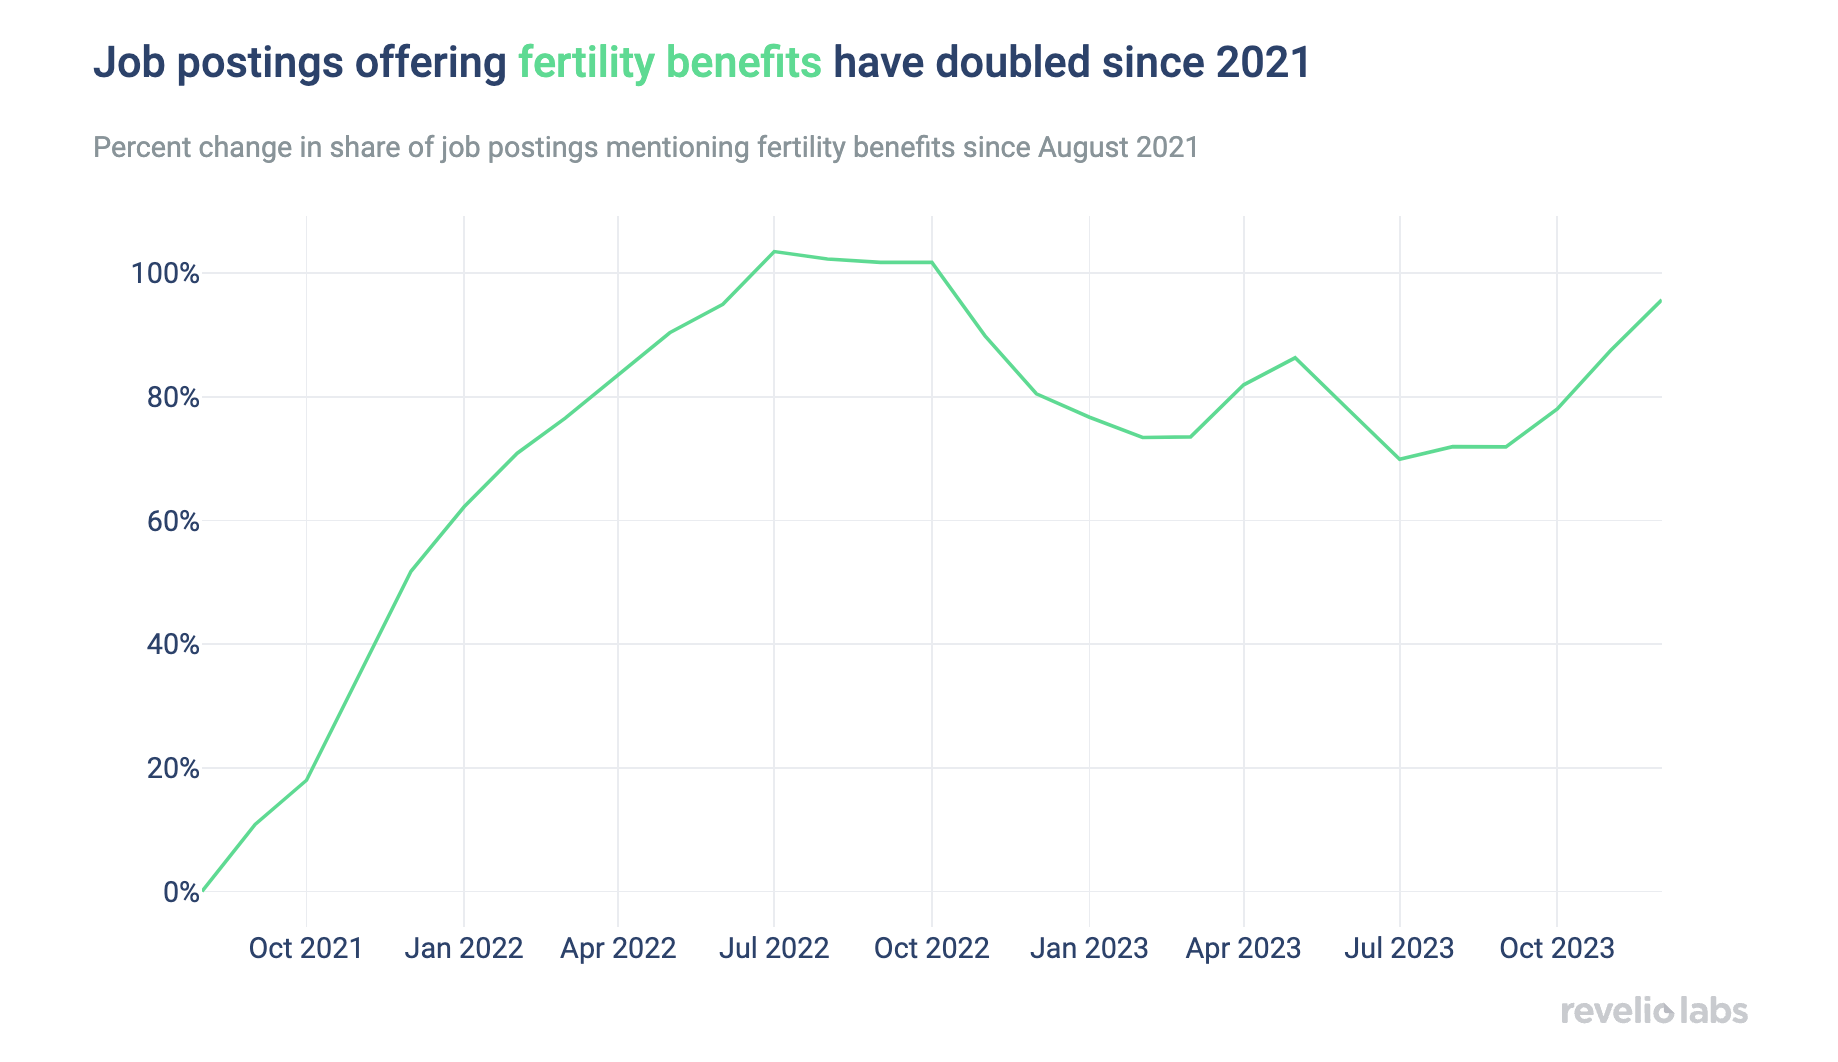 The share of jobs offering fertility benefits has doubled since 2021